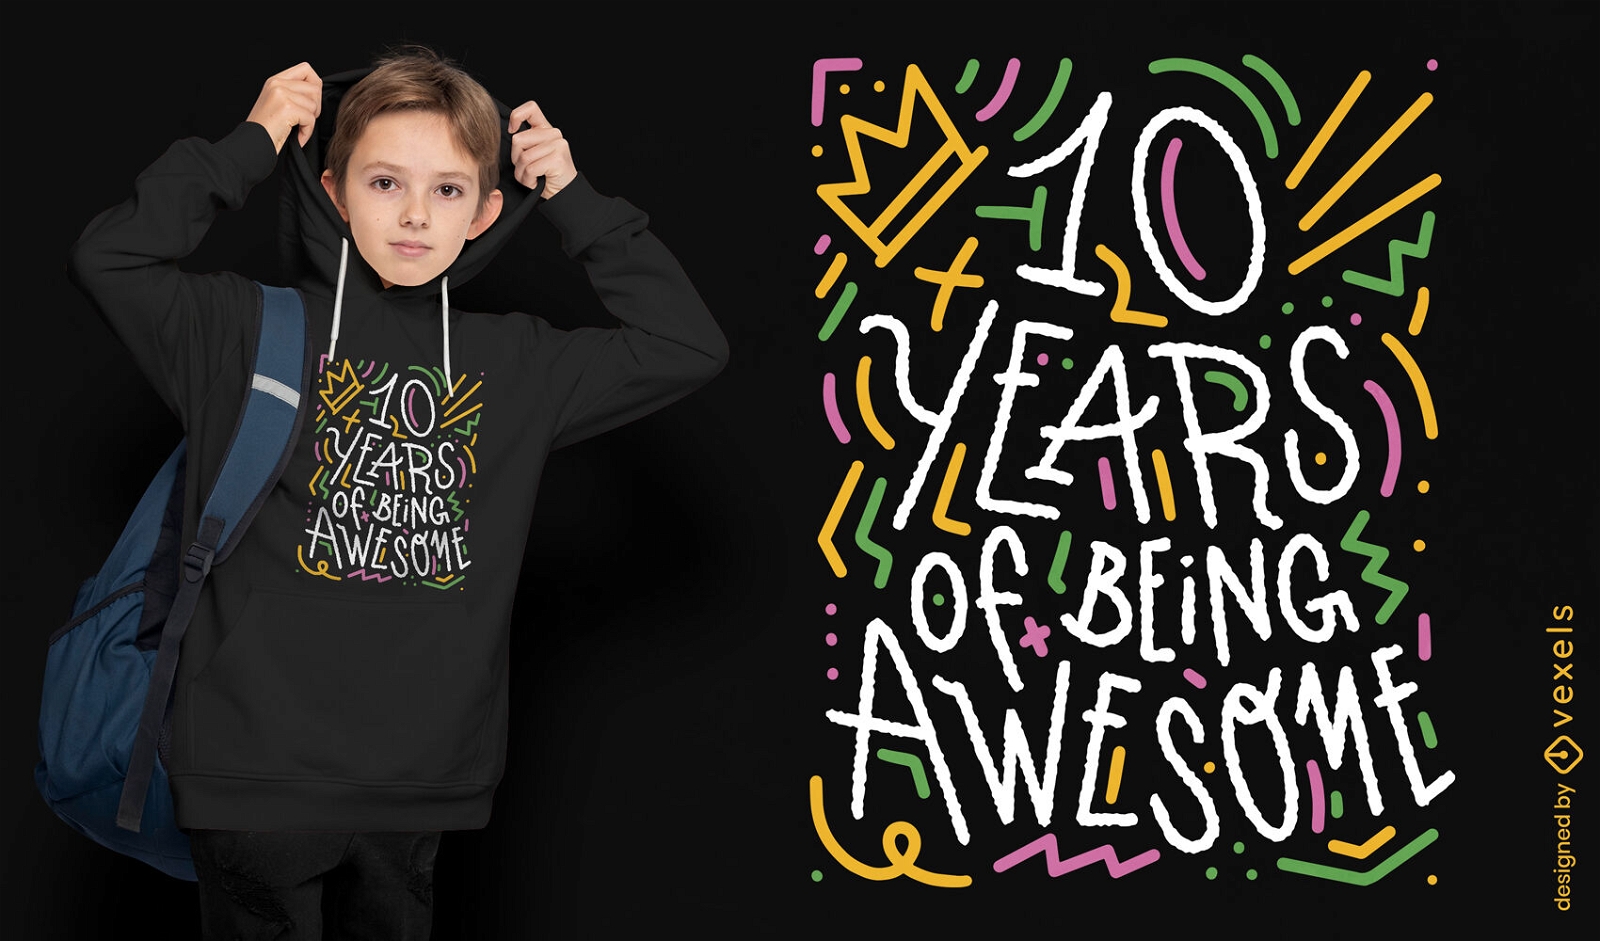 10 years of being awesome children t-shirt design